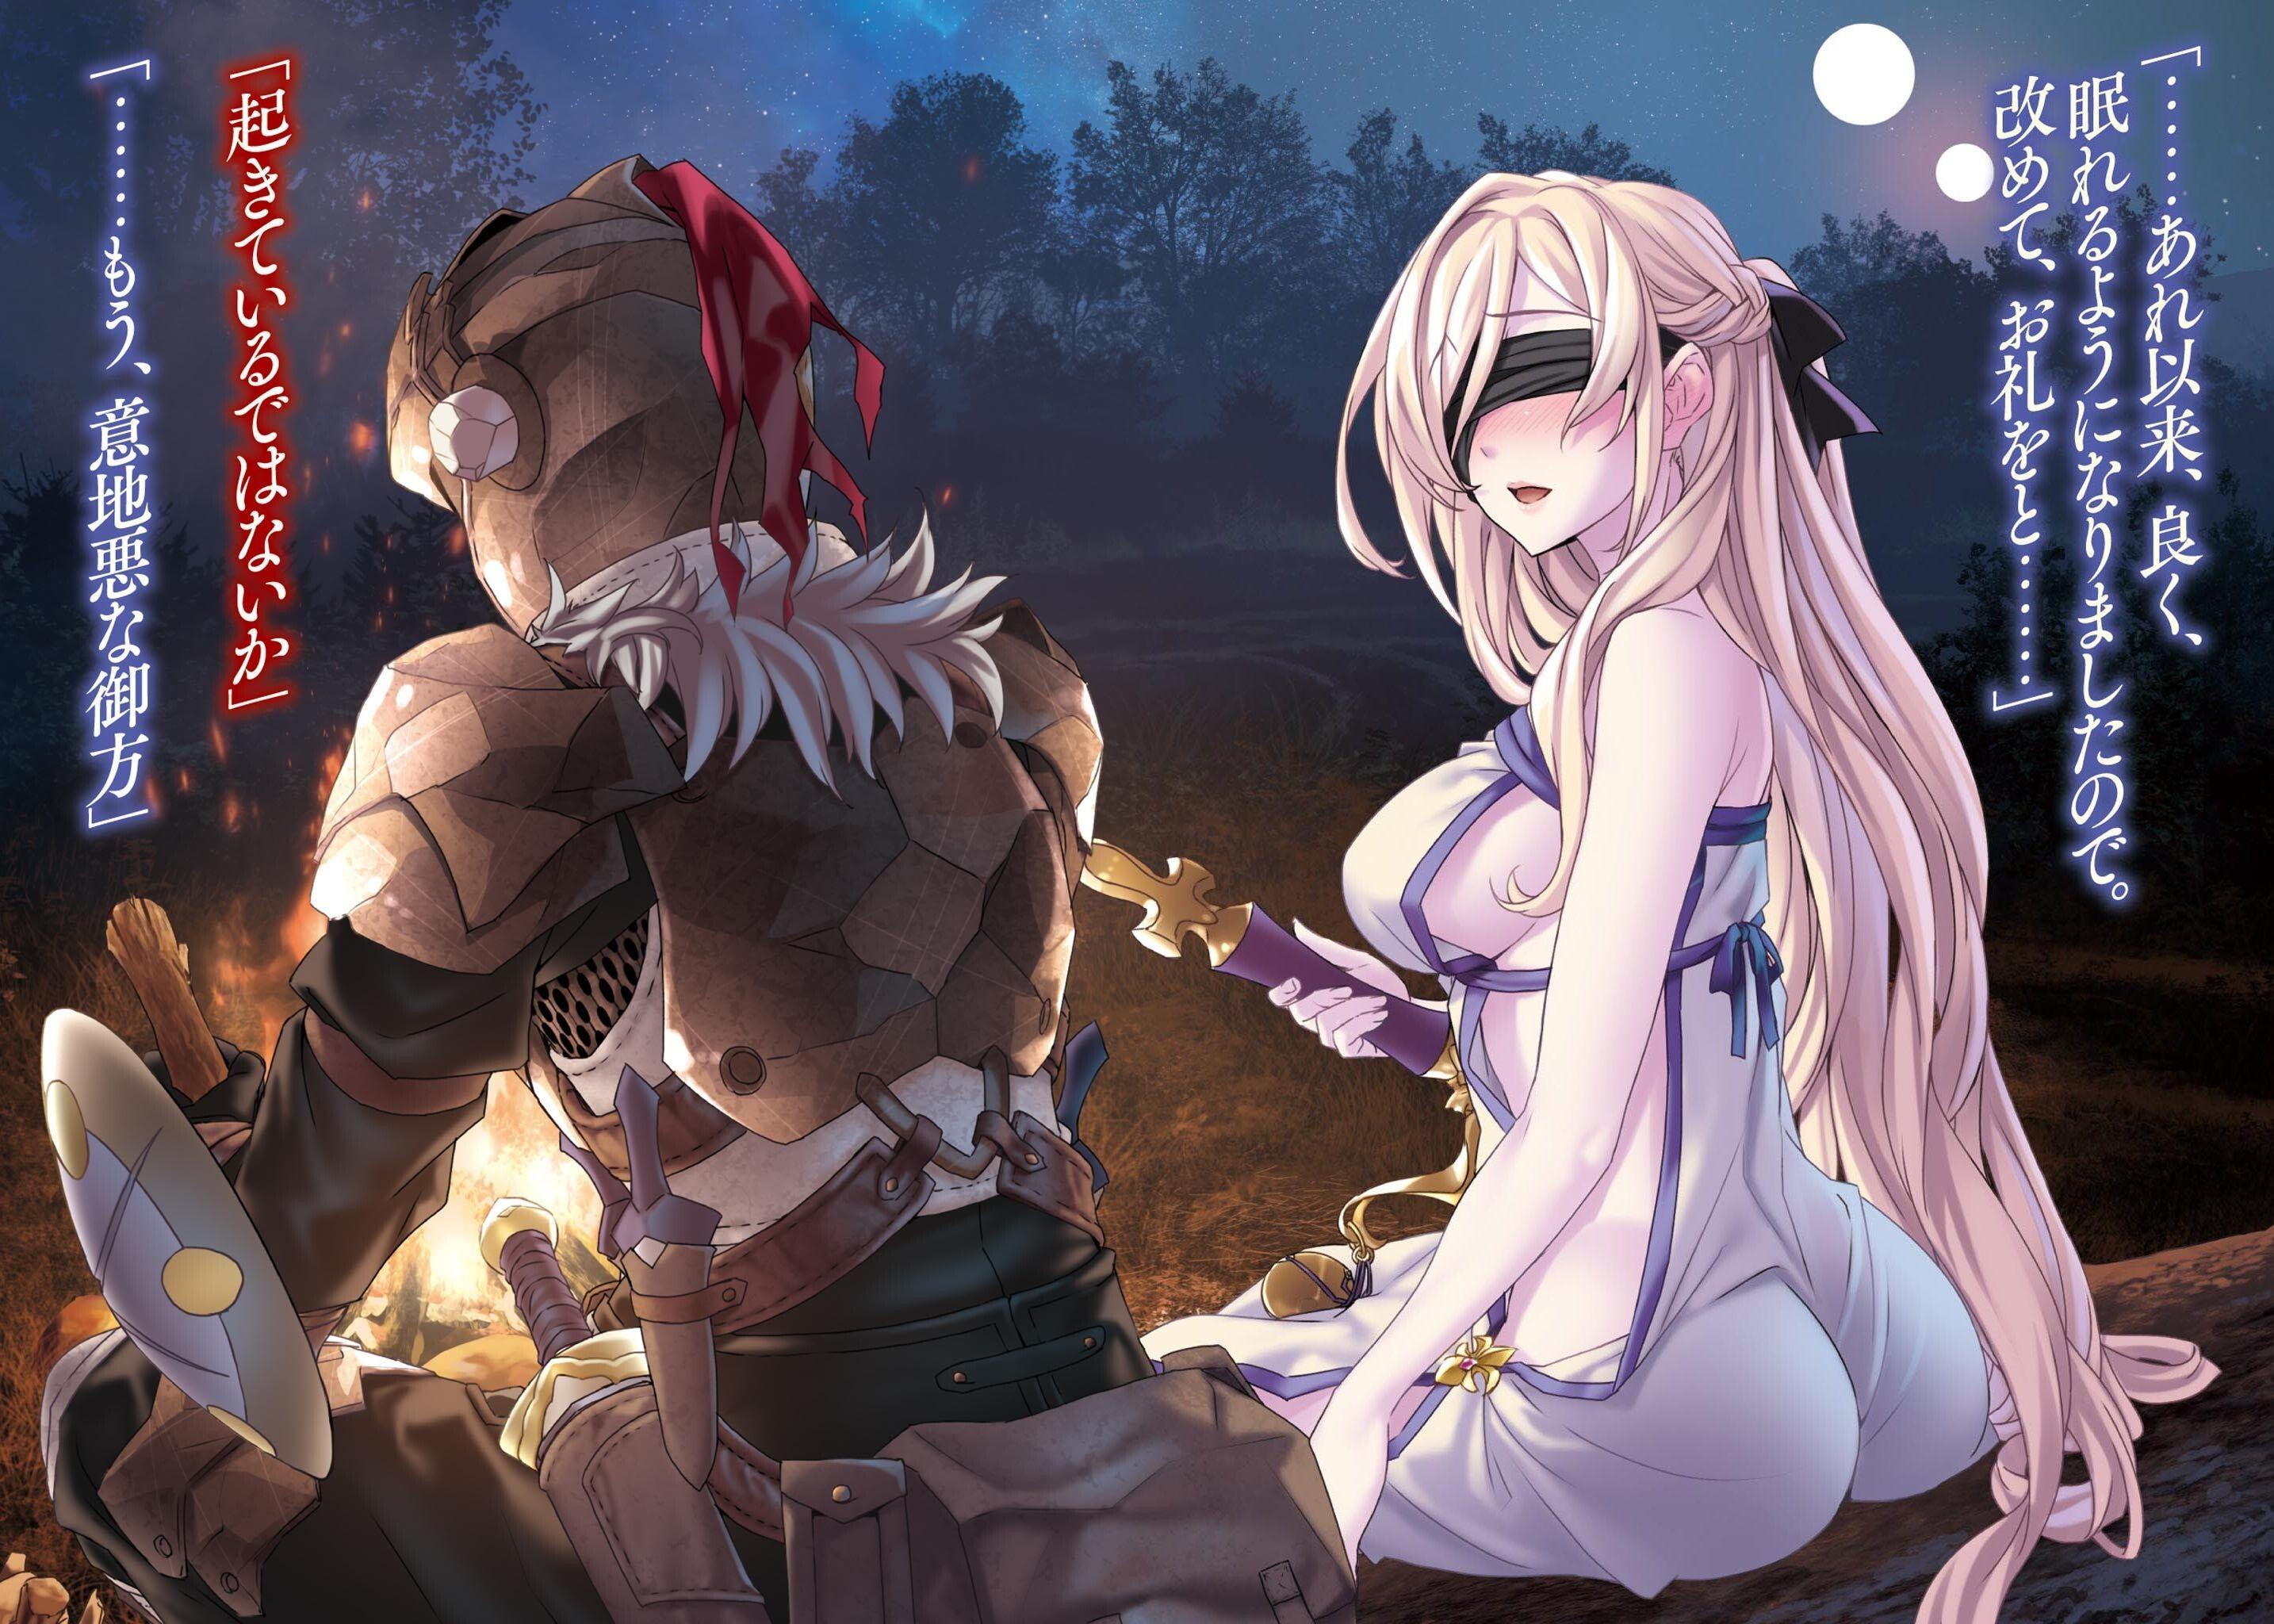 Goblin Cave Anime - Goblin Slayer - Episode 1 (Review) - The Geekly Grind : Bahia exploring a cave, while some.shady creatures lurk around.